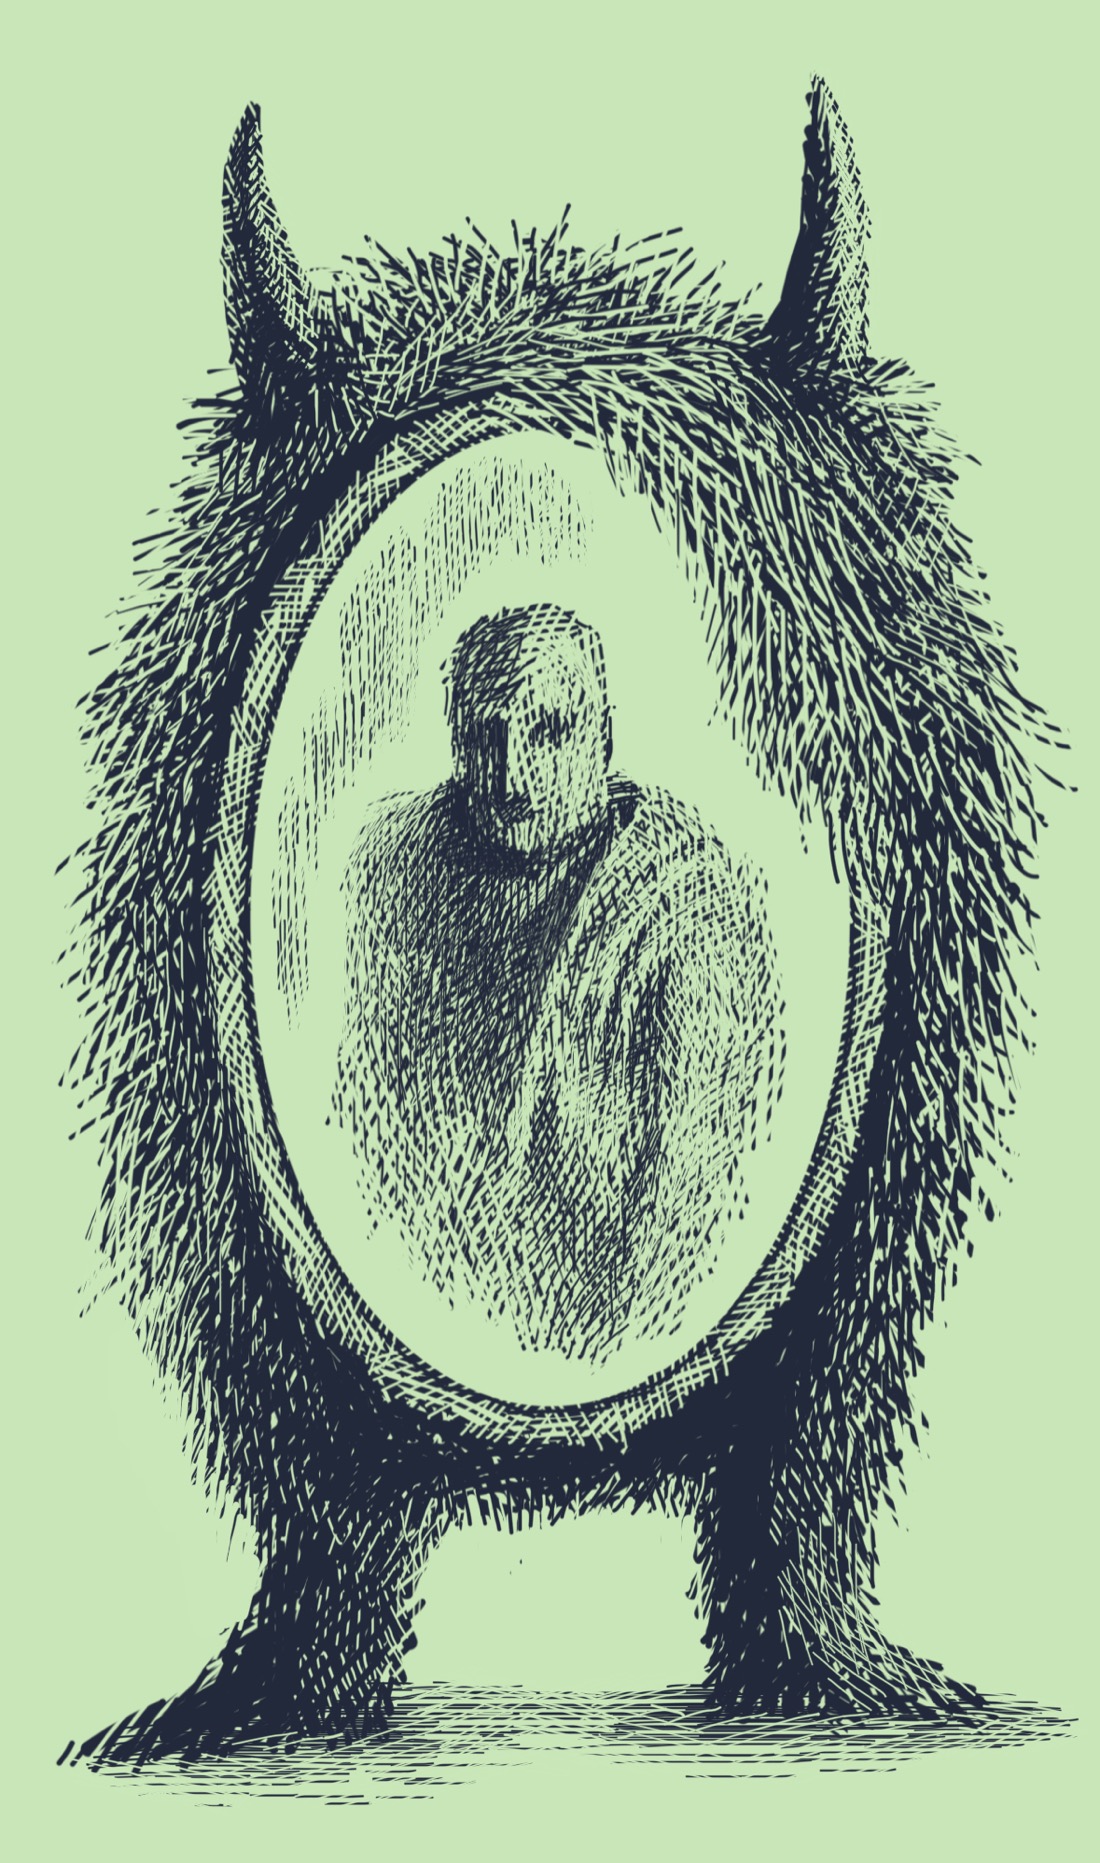 A large, egg-shaped, furry creature with two horns. The entire front of the creature's body is a mirror, in which is reflected a blurry figure wearing a coat.